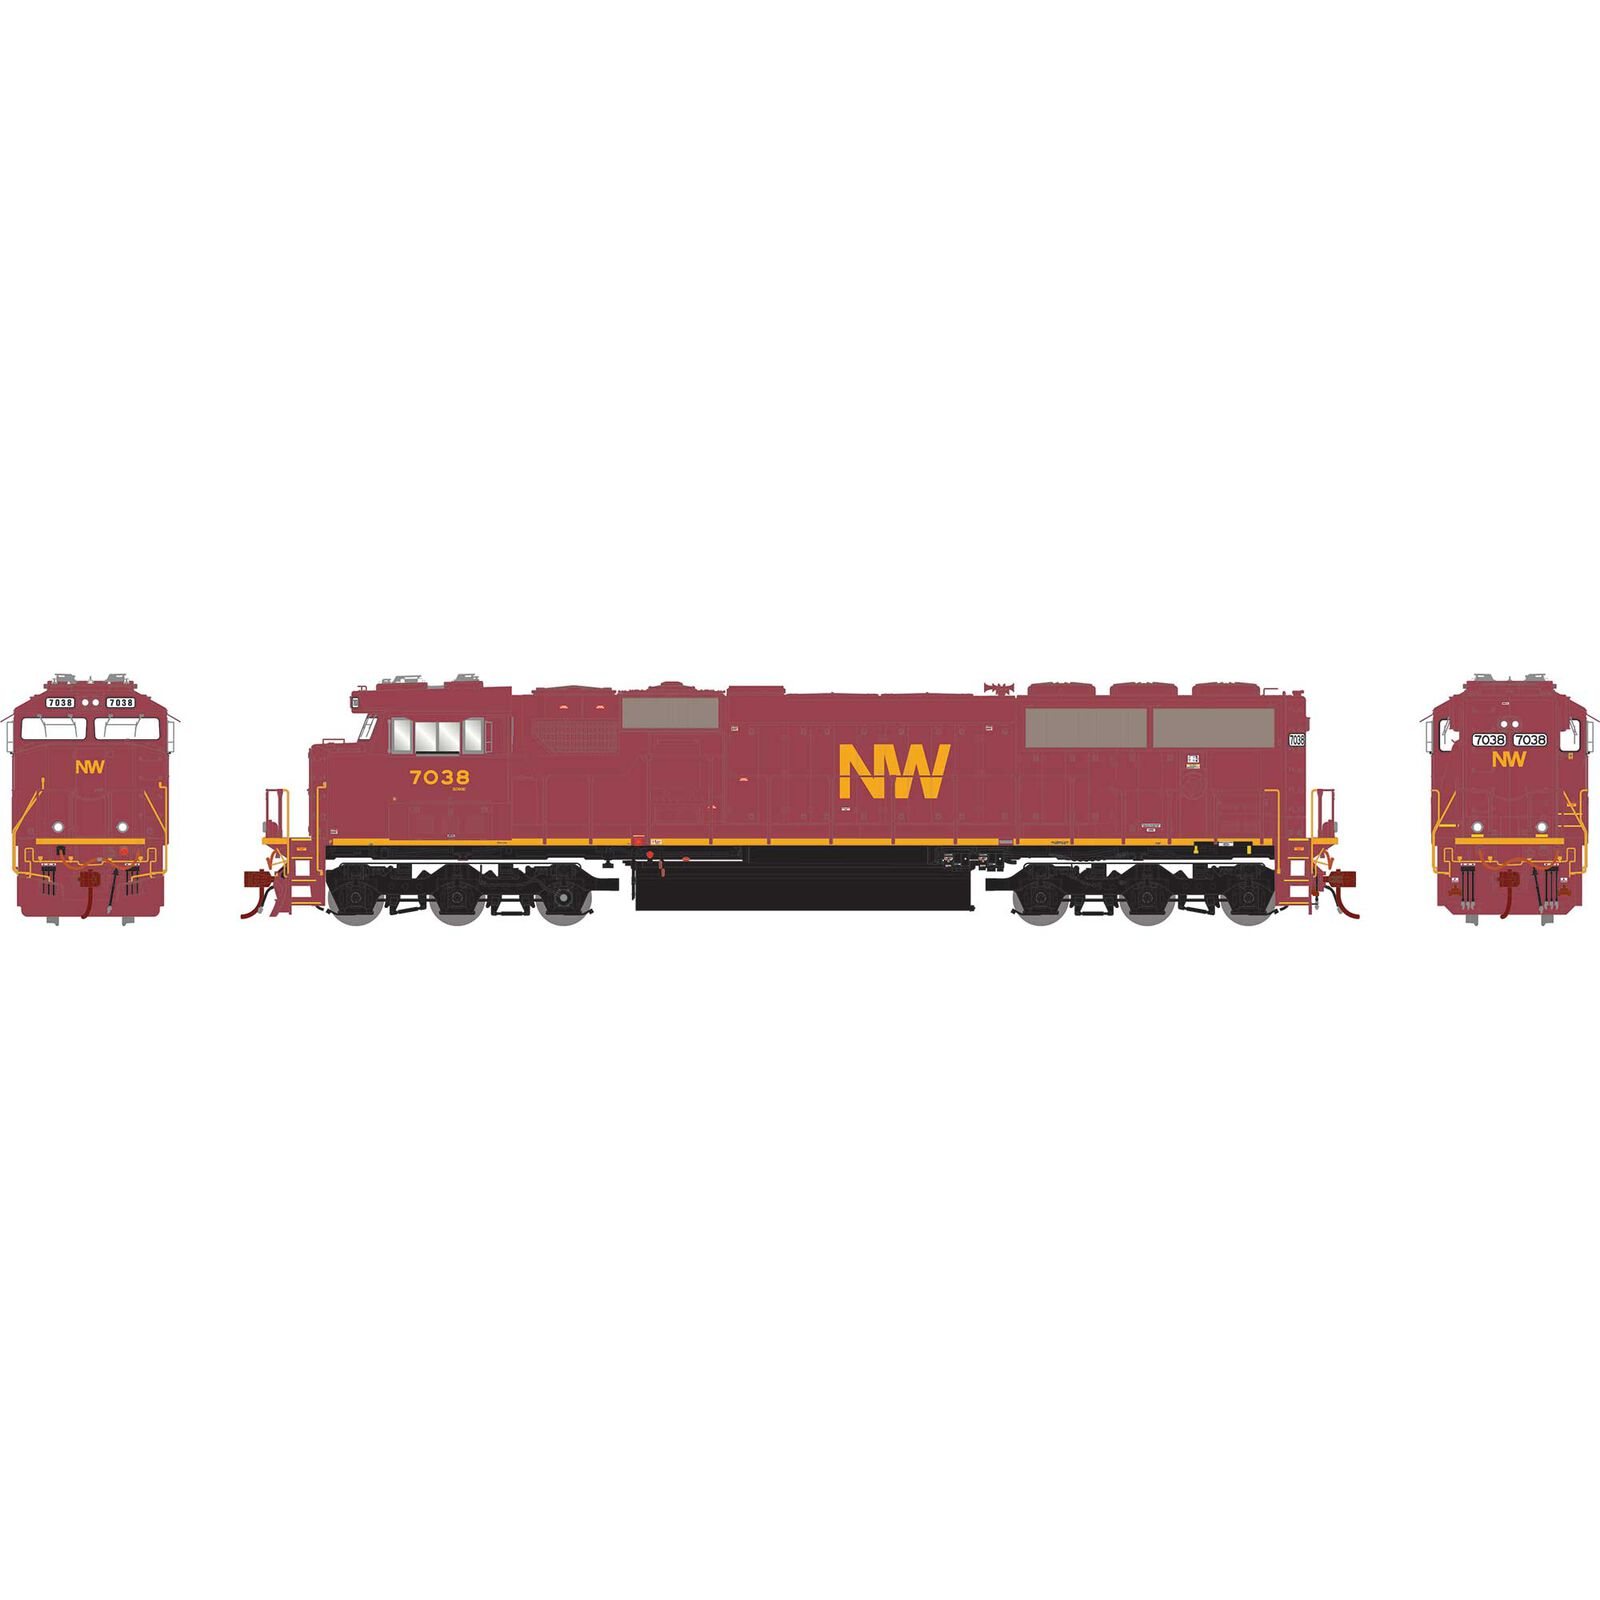 HO SD60E Locomotive with DCC & Sound, NS / NW / Heritage #7038